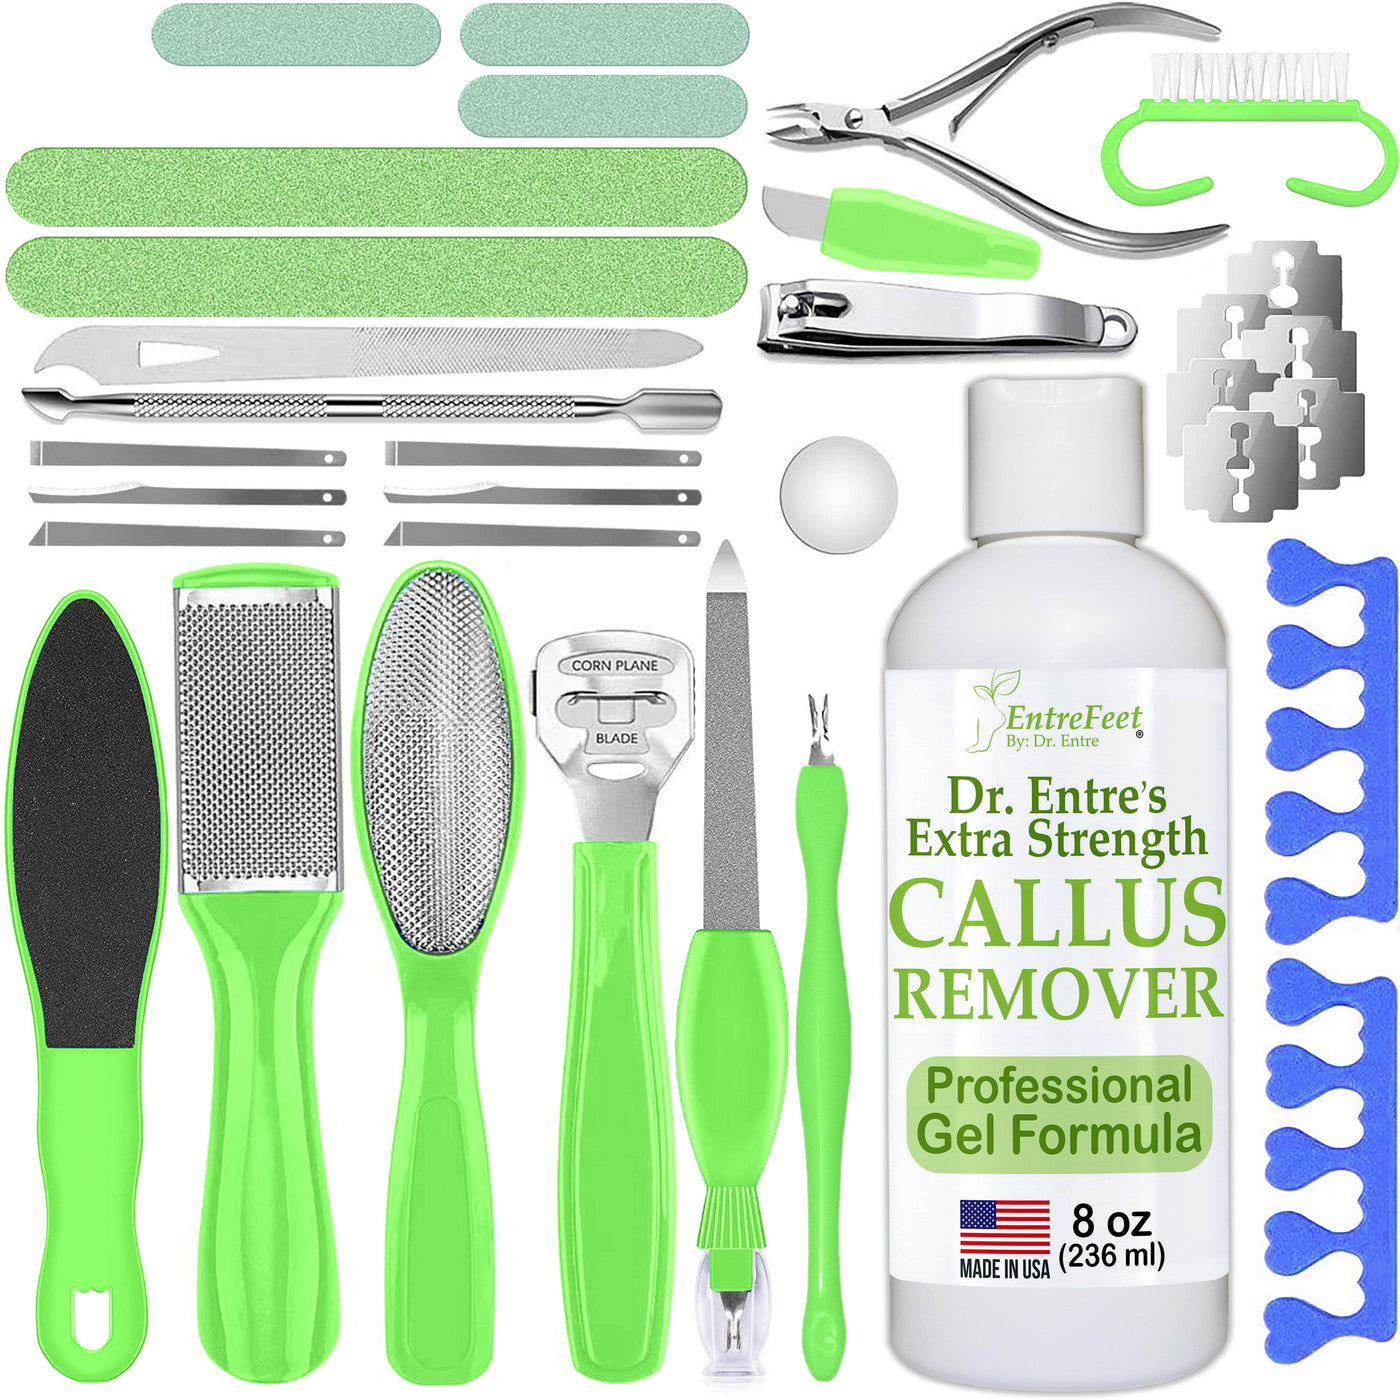 Dr. Entre's Pedicure Kit: 32 in 1 with Callus Remover Gel, Foot File, Pedicure Tools Supplies, Dead Skin Remover, Spa Kit